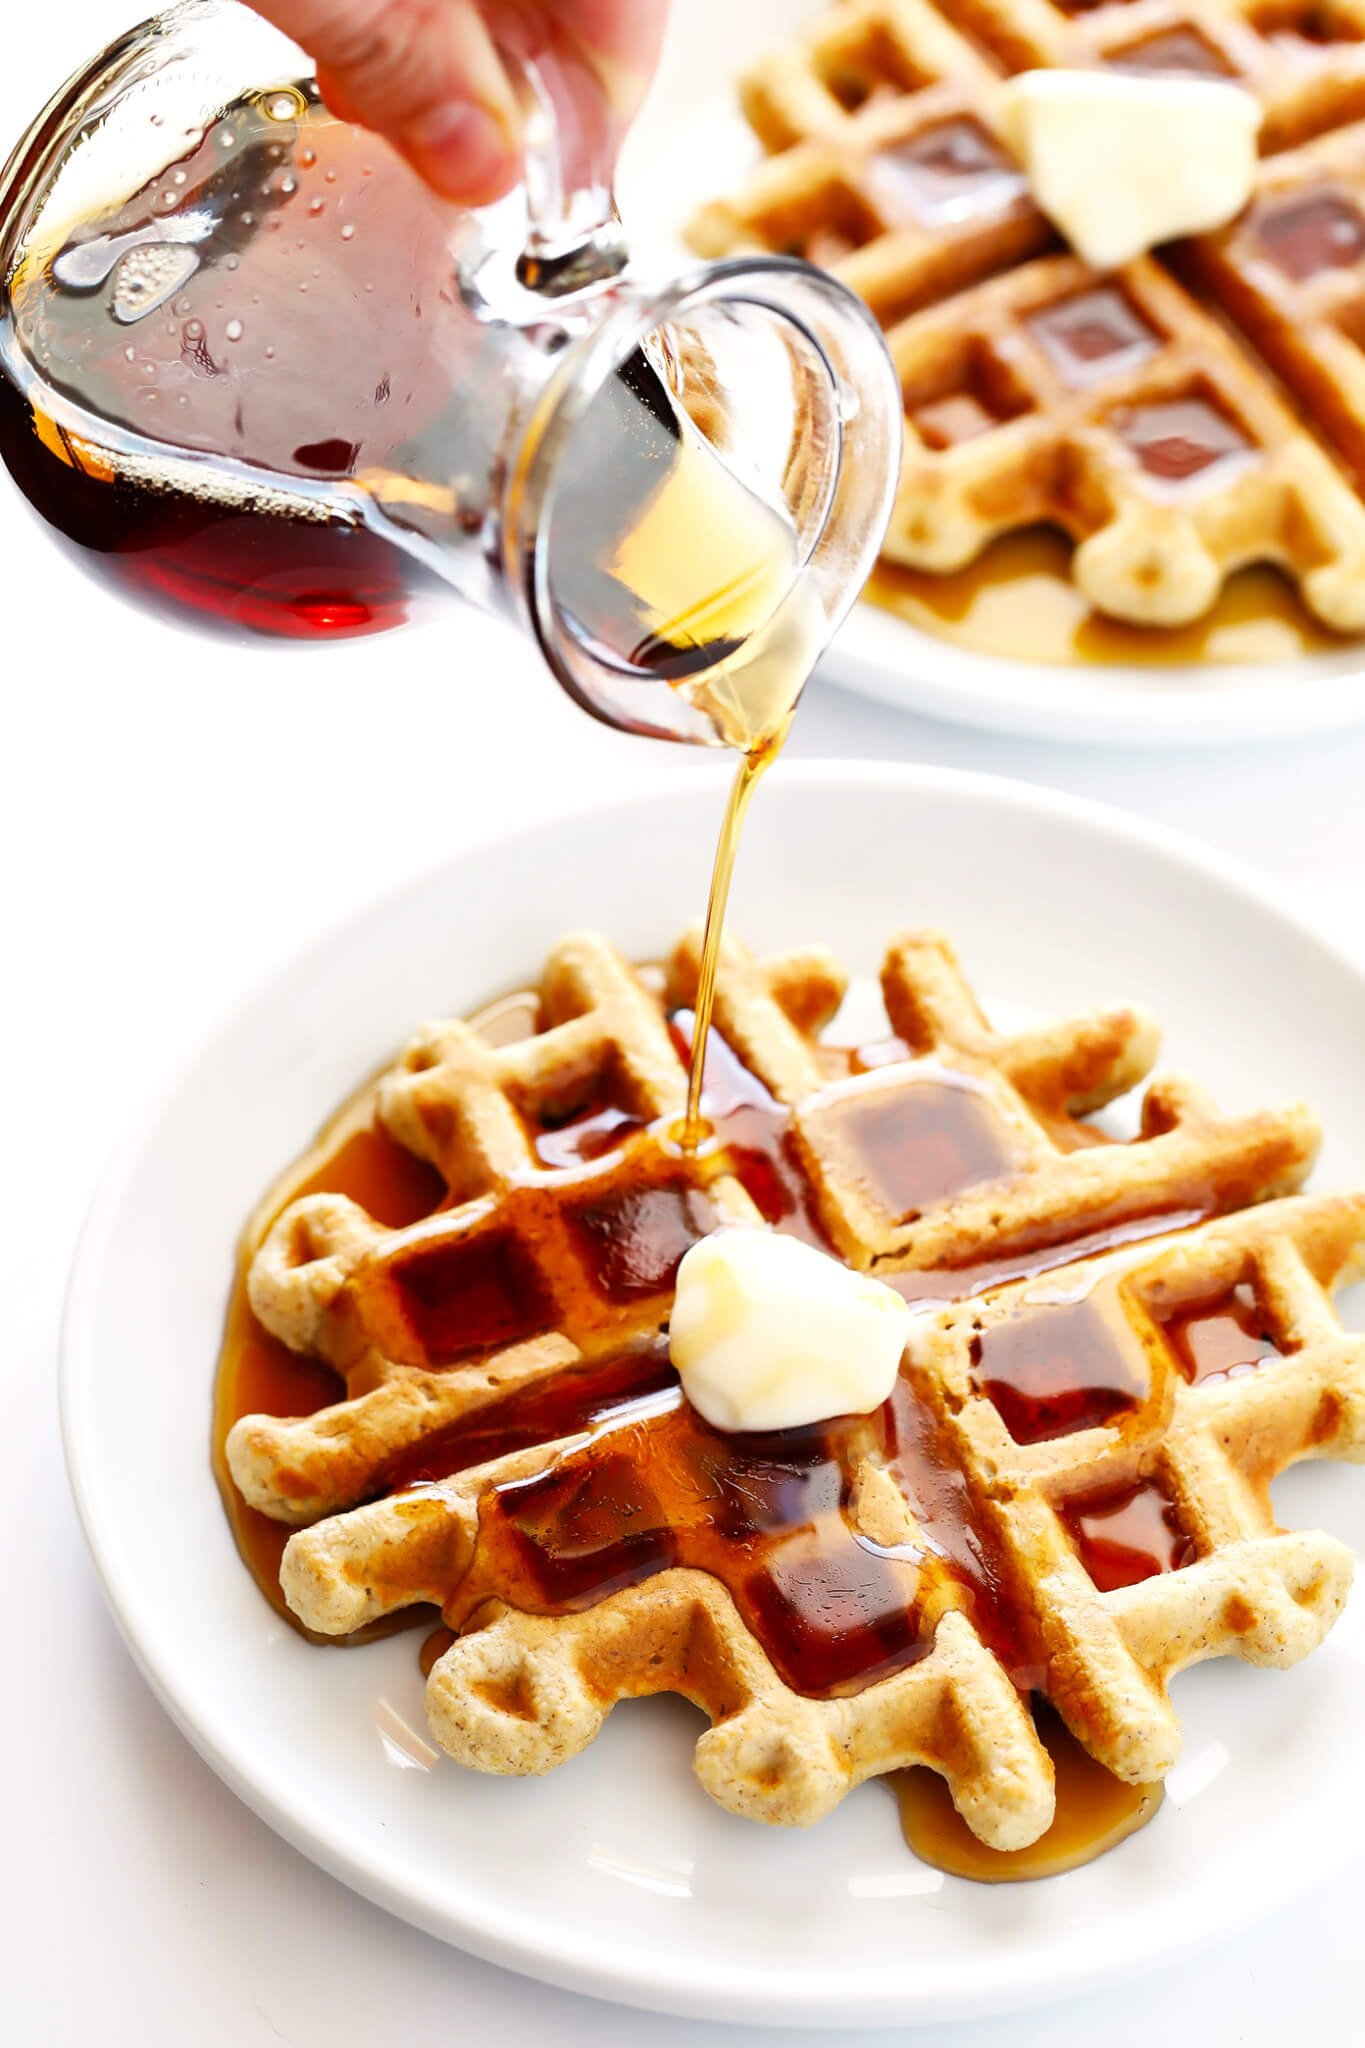 This easy Gluten-Free Waffles recipe is made with everyday ingredients you probably already have on hand (like lots of old-fashioned oats), and it's the perfect easy recipe for breakfast or brunch!